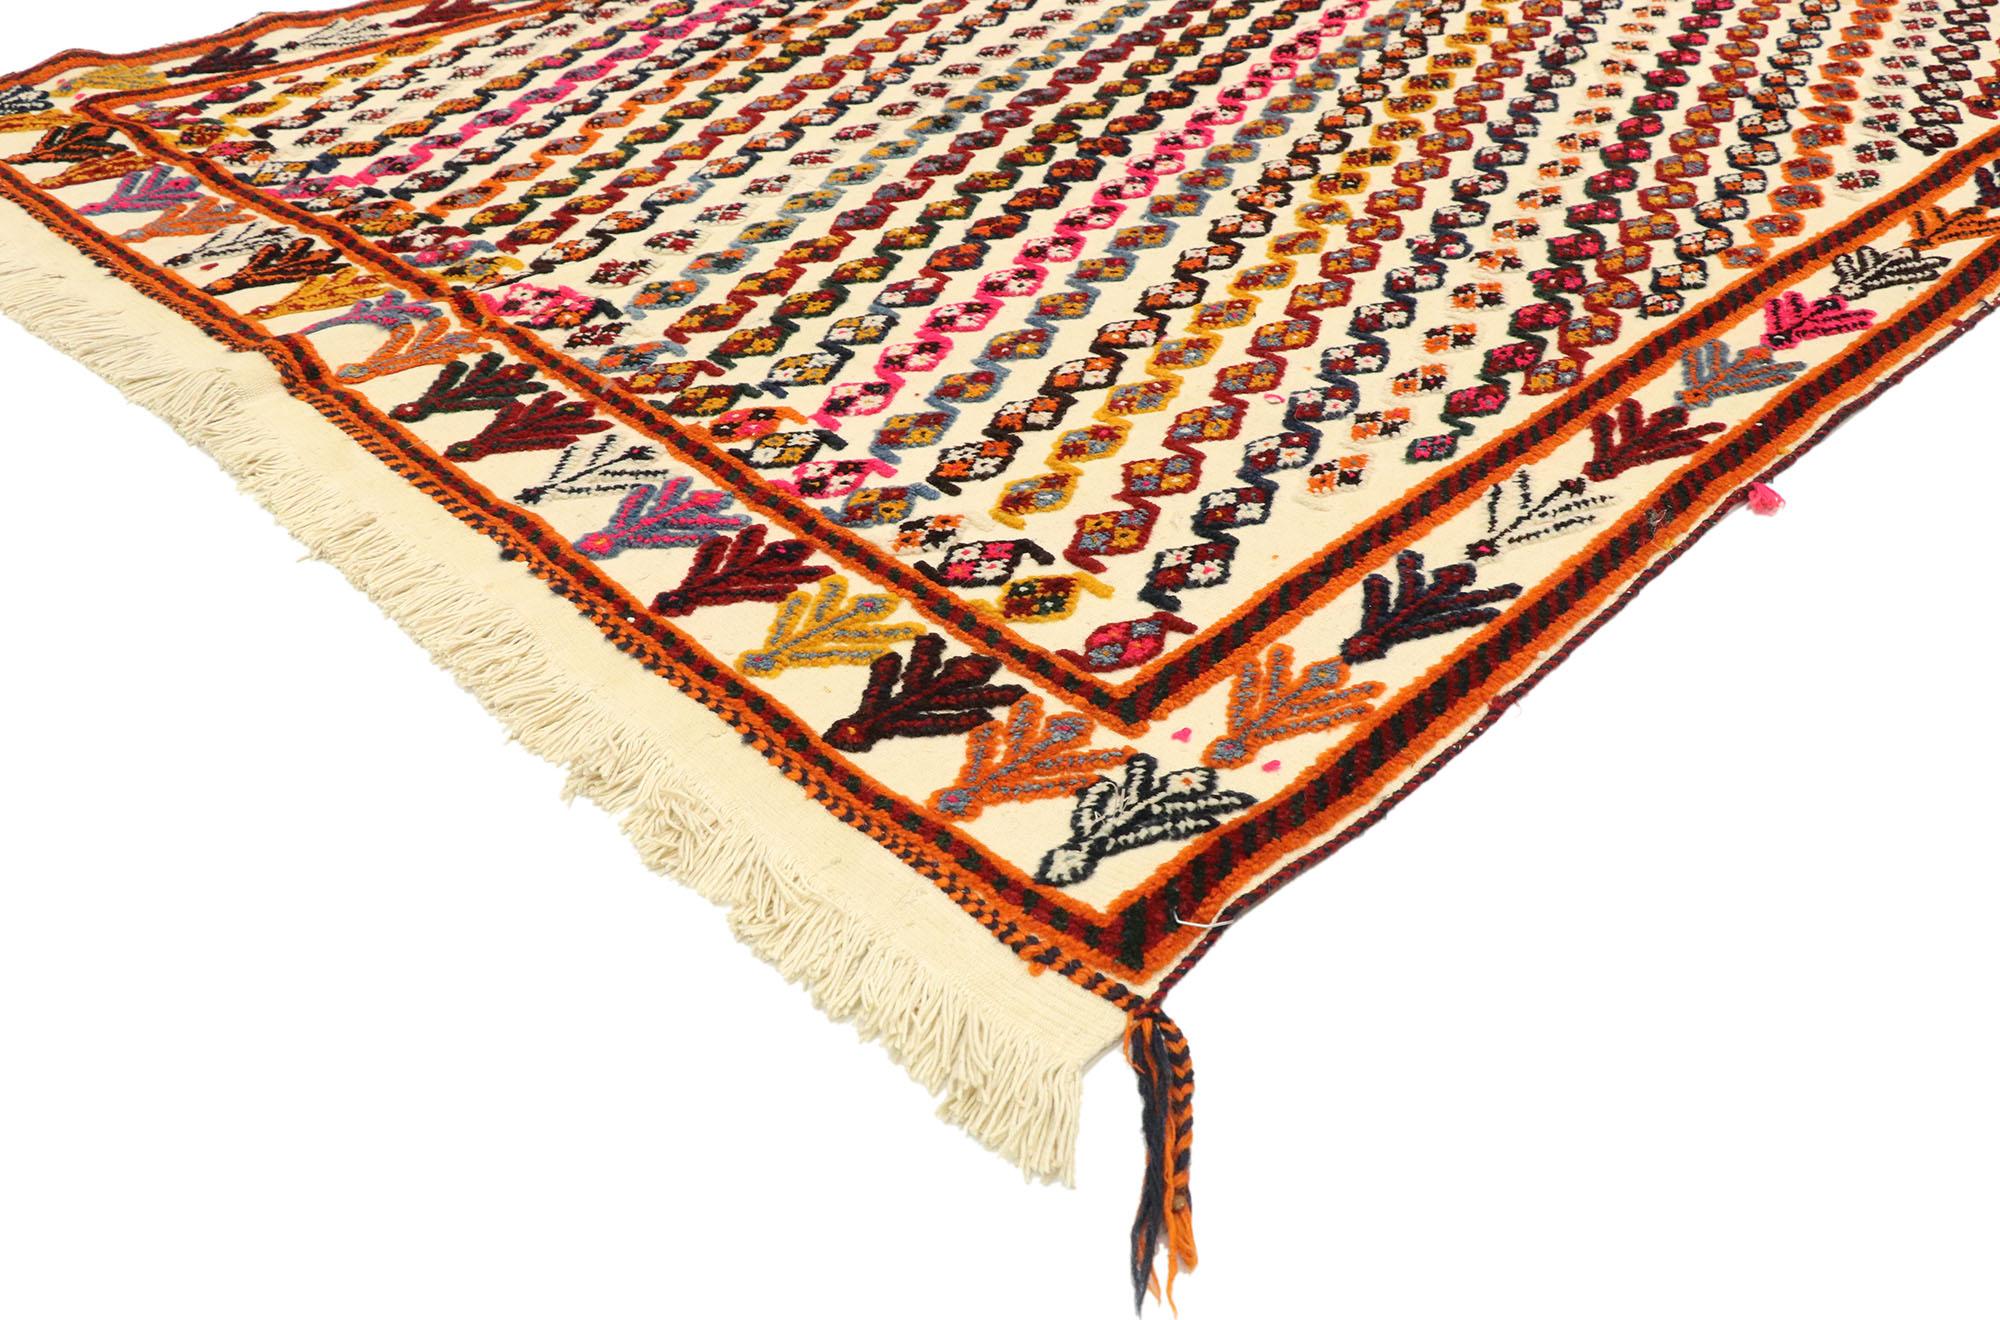 72764, vintage Moroccan Souf Kilim rug with boho chic Tribal style, high-low rug. Woven using a mixed technique of both pile and flat-weave, this handwoven wool vintage Moroccan Kilim rug adds a fresh sense of style. Modern tribal style combined